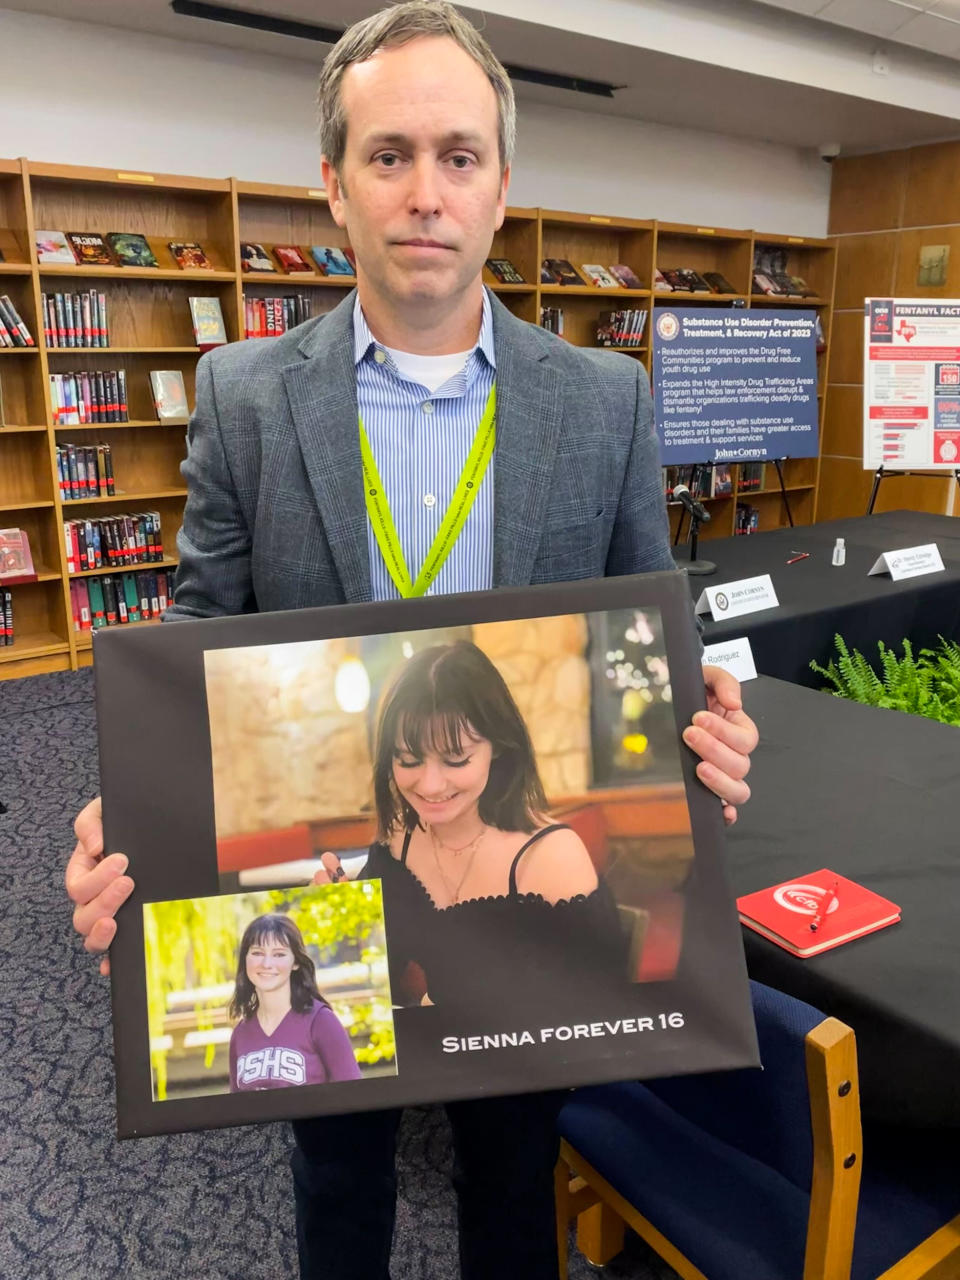 Ryan Vaughn holds photos of his daughter Sienna Vaughn who died from fentanyl poisoning on Feb. 19. (Daniella Silva / NBC News)